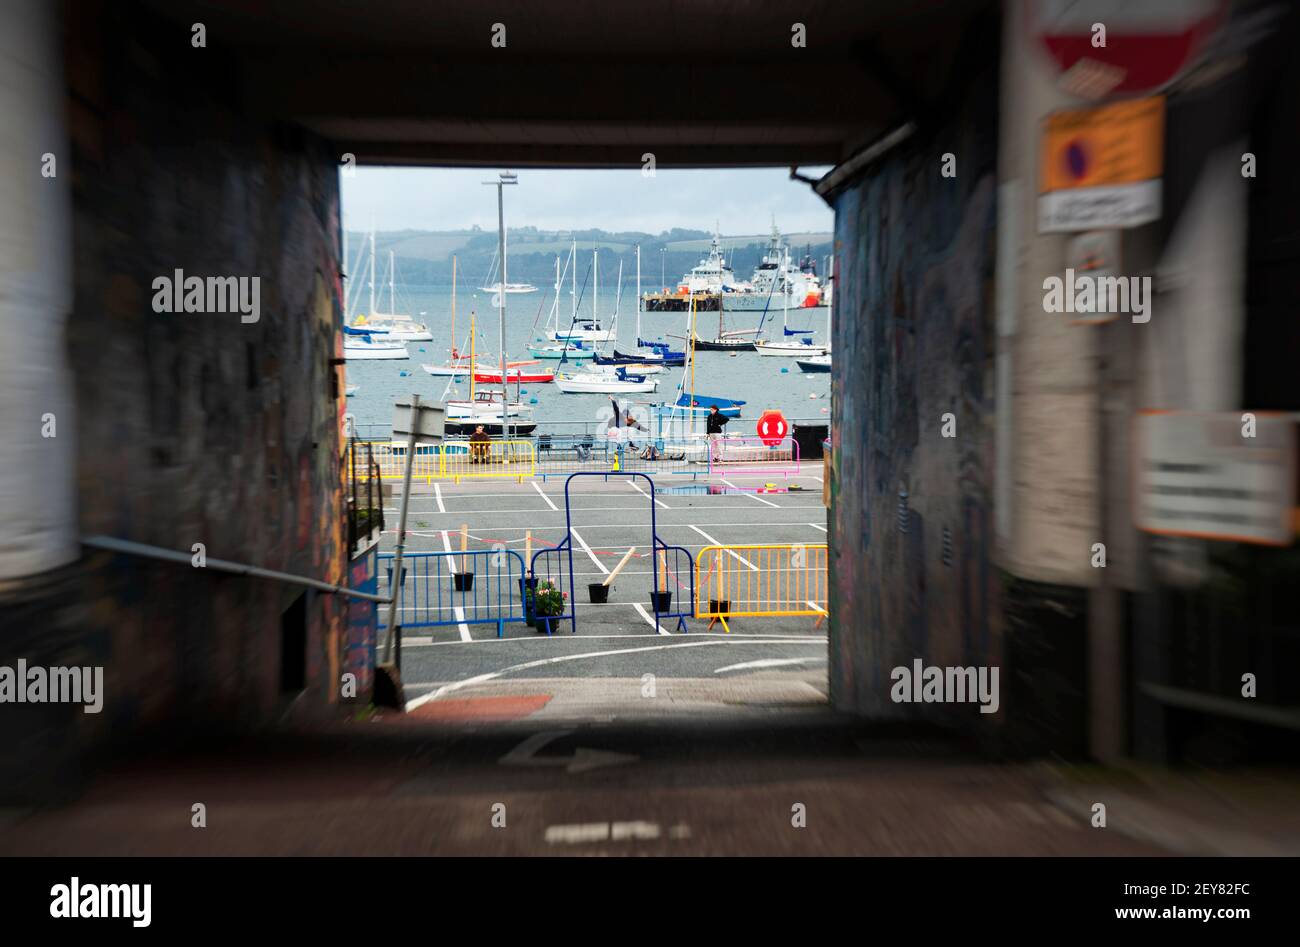 Skateboarders practice their tricks against a backdrop of Falmouth harbour, Cornwall, UK Stock Photo